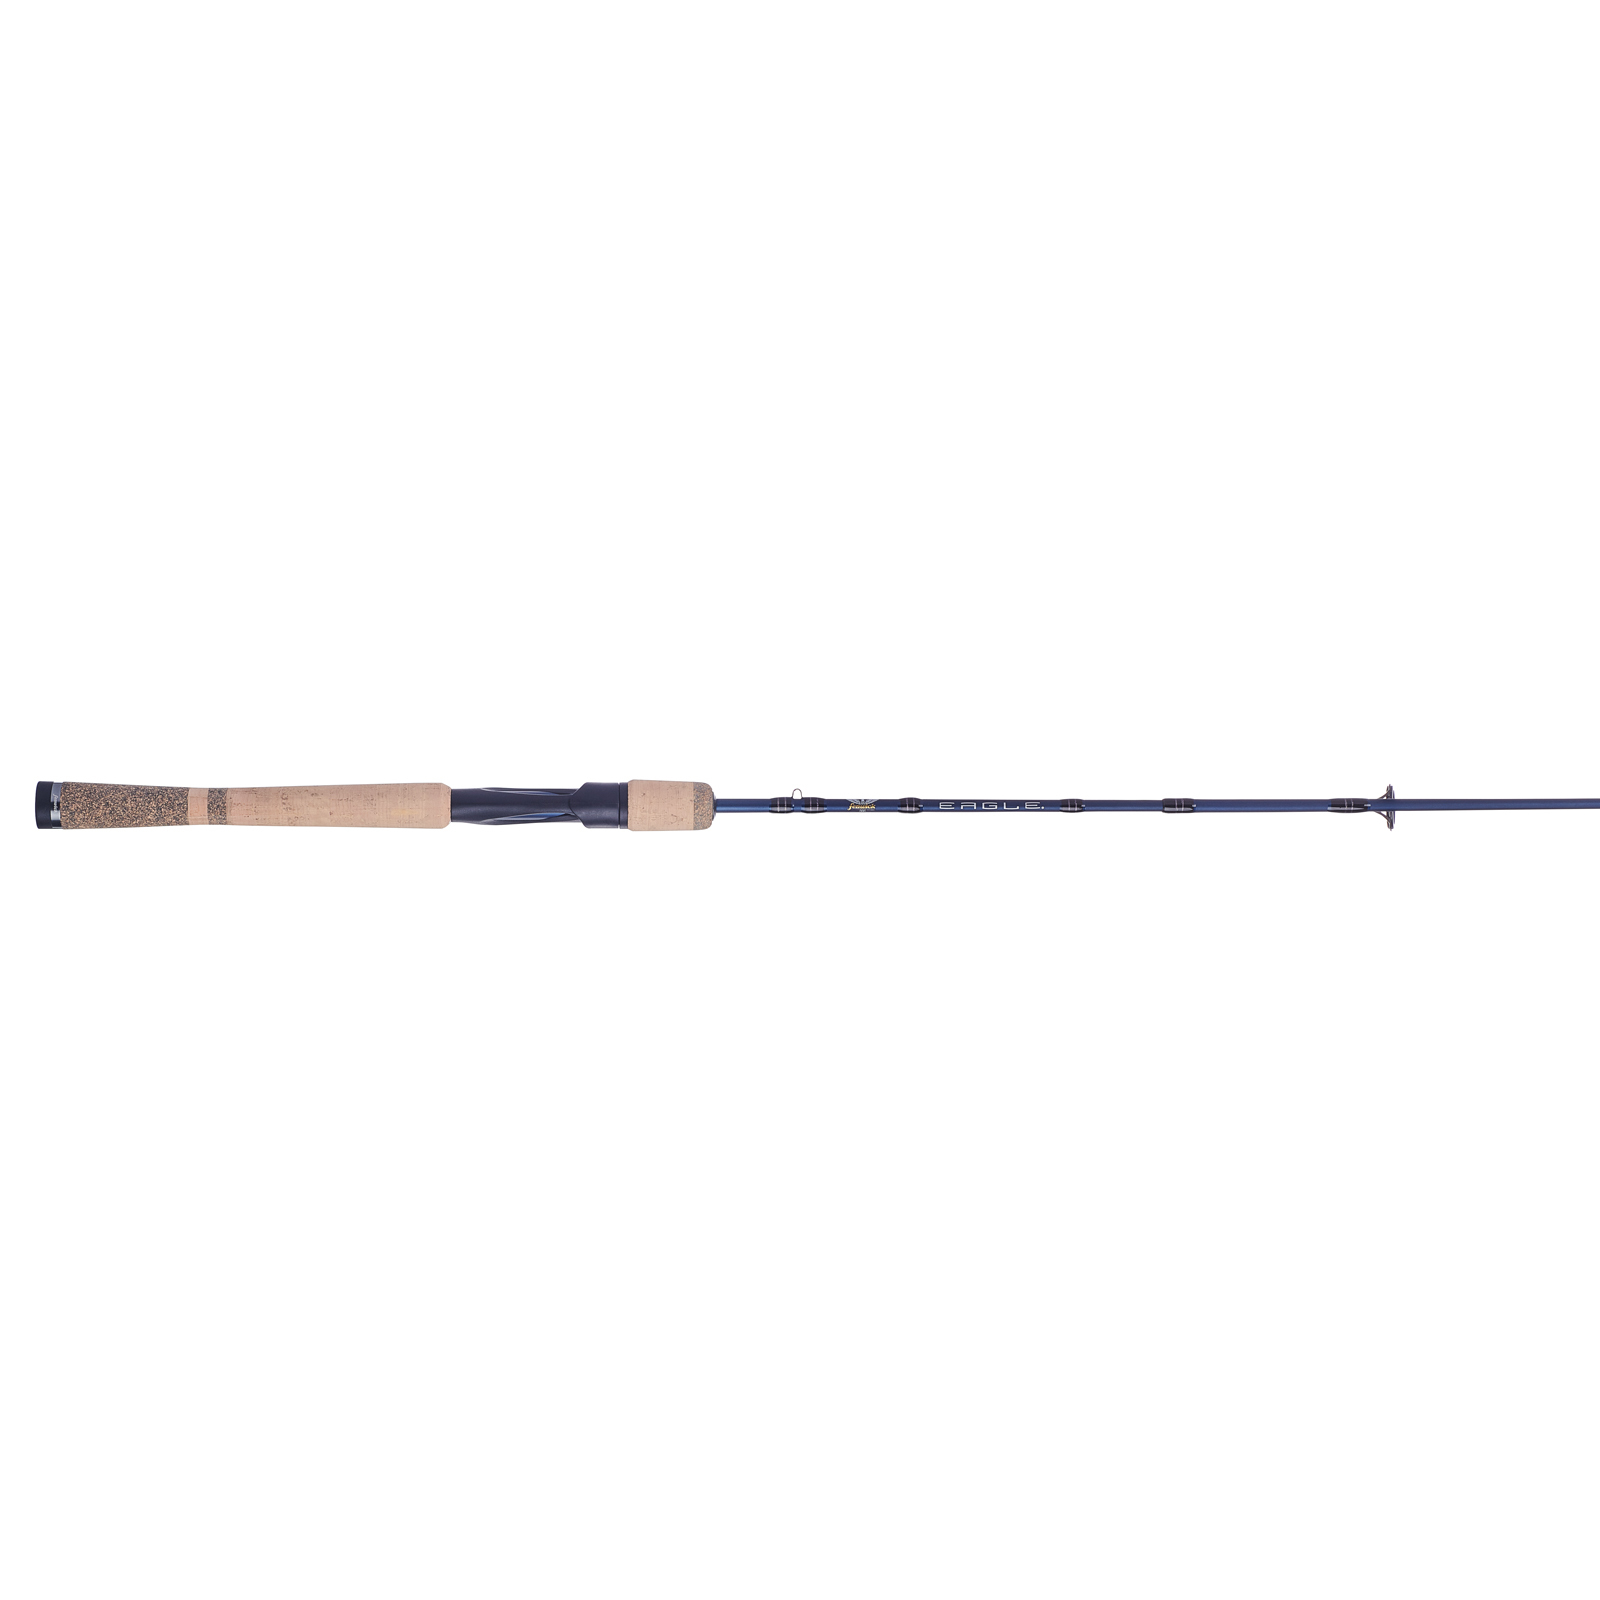 Fenwick Eagle Spinning Rod, Medium 4 Piece, Travel Medium Tapper 8-20lb, 24  Ton Graphite, Prem Cork, Tach Grip, SS Guide with Alum Oxite Insrt  EAG86M-MS-4 with Free S&H — CampSaver